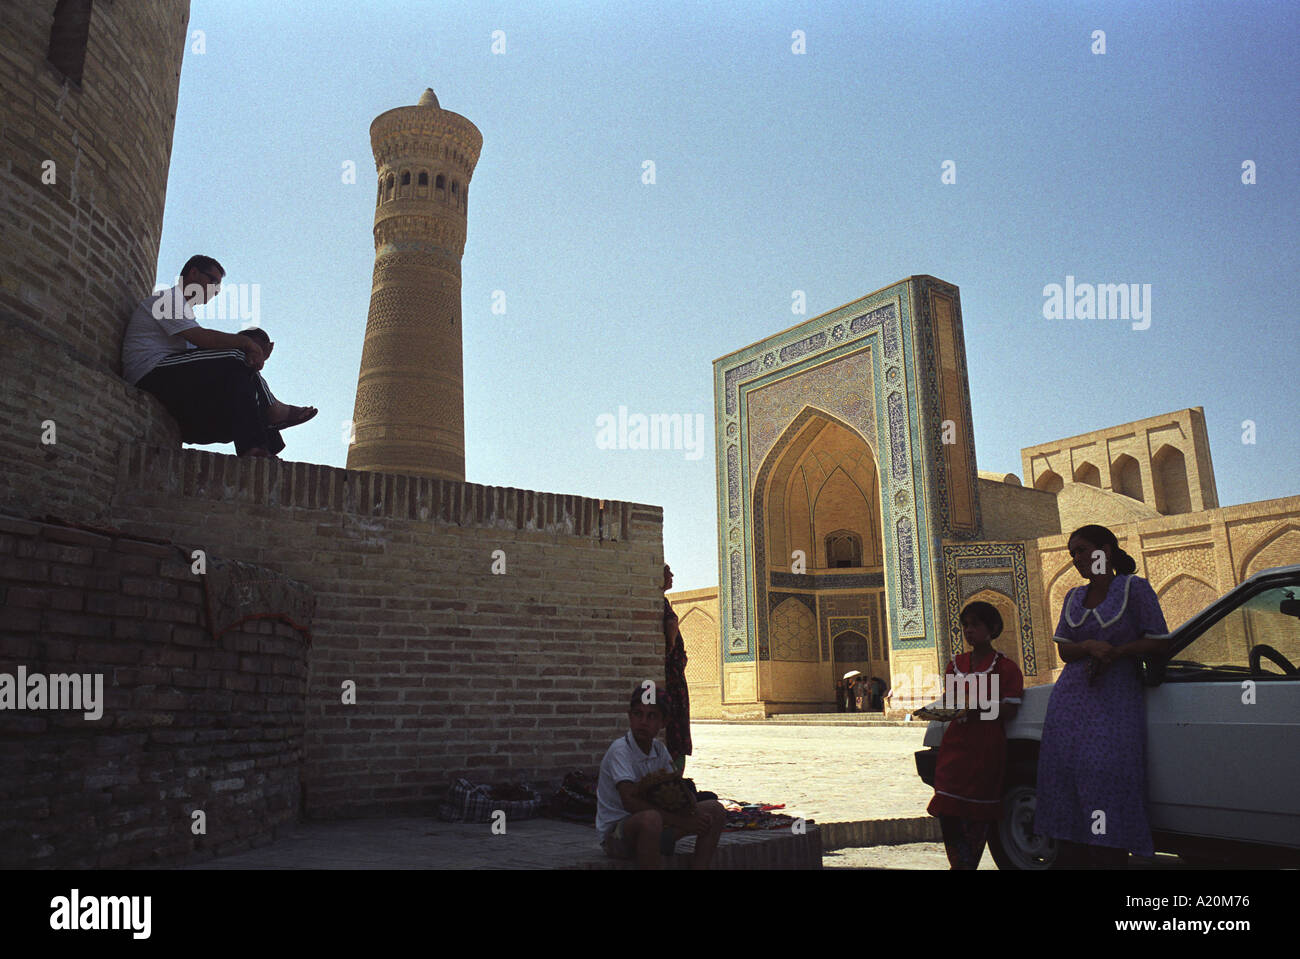 Sellers of carpets and tourist souvenirs sit in the shade outside the Kalan Mosque and Medressa, Bukhara, Uzbekistan Stock Photo